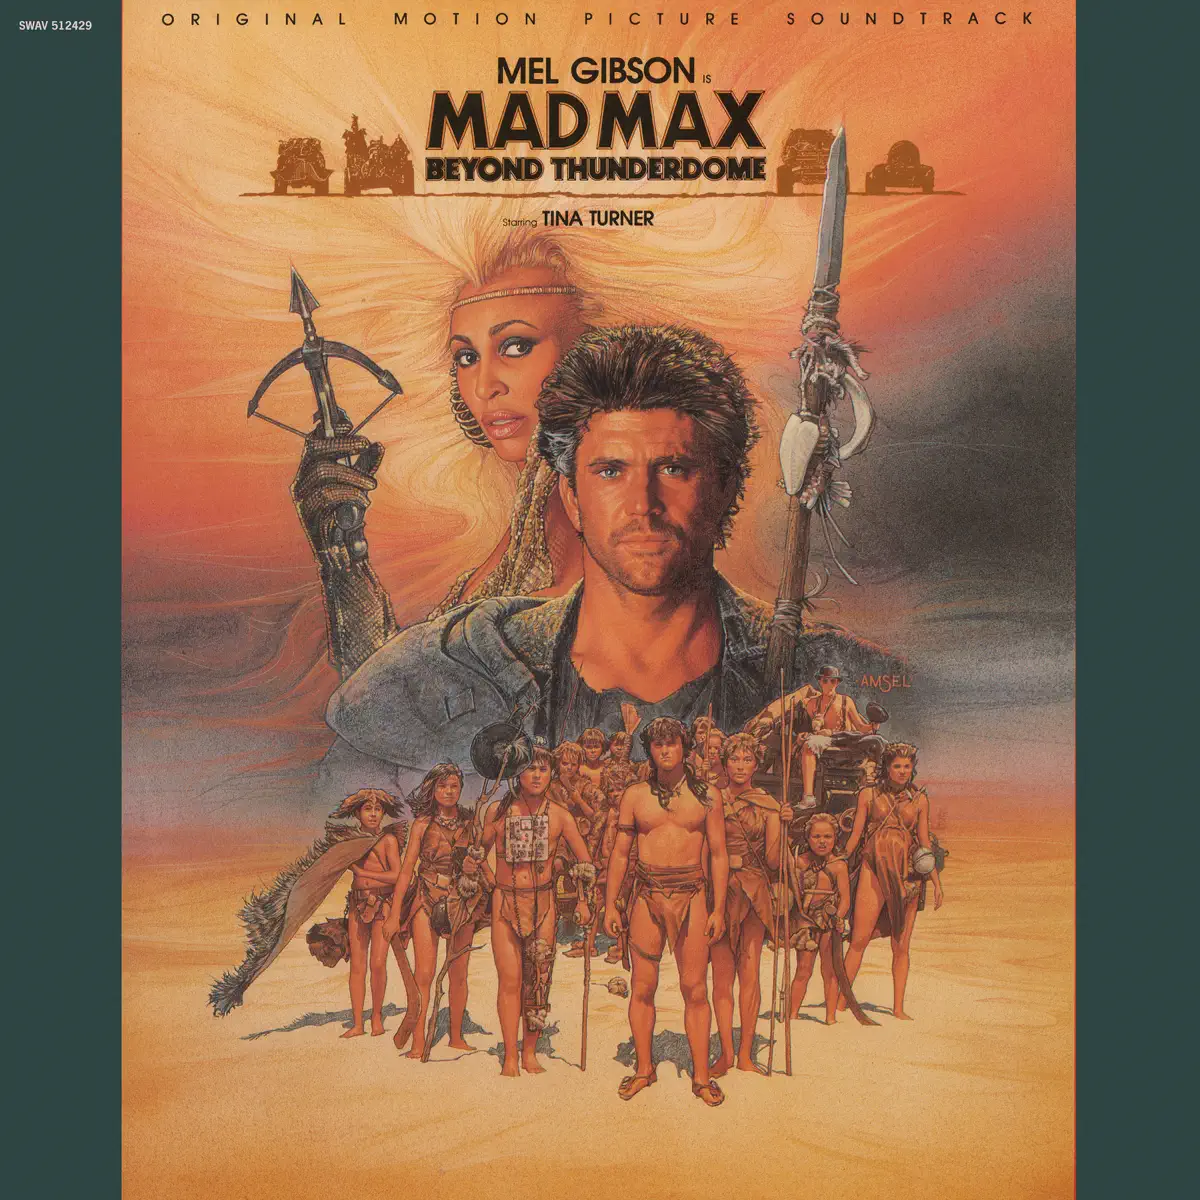 Tina Turner & Royal Philharmonic Orchestra - 疯狂的麦克斯3 Mad Max Beyond Thunderdome (Original Motion Picture Soundtrack) (1985) [iTunes Plus AAC M4A]-新房子